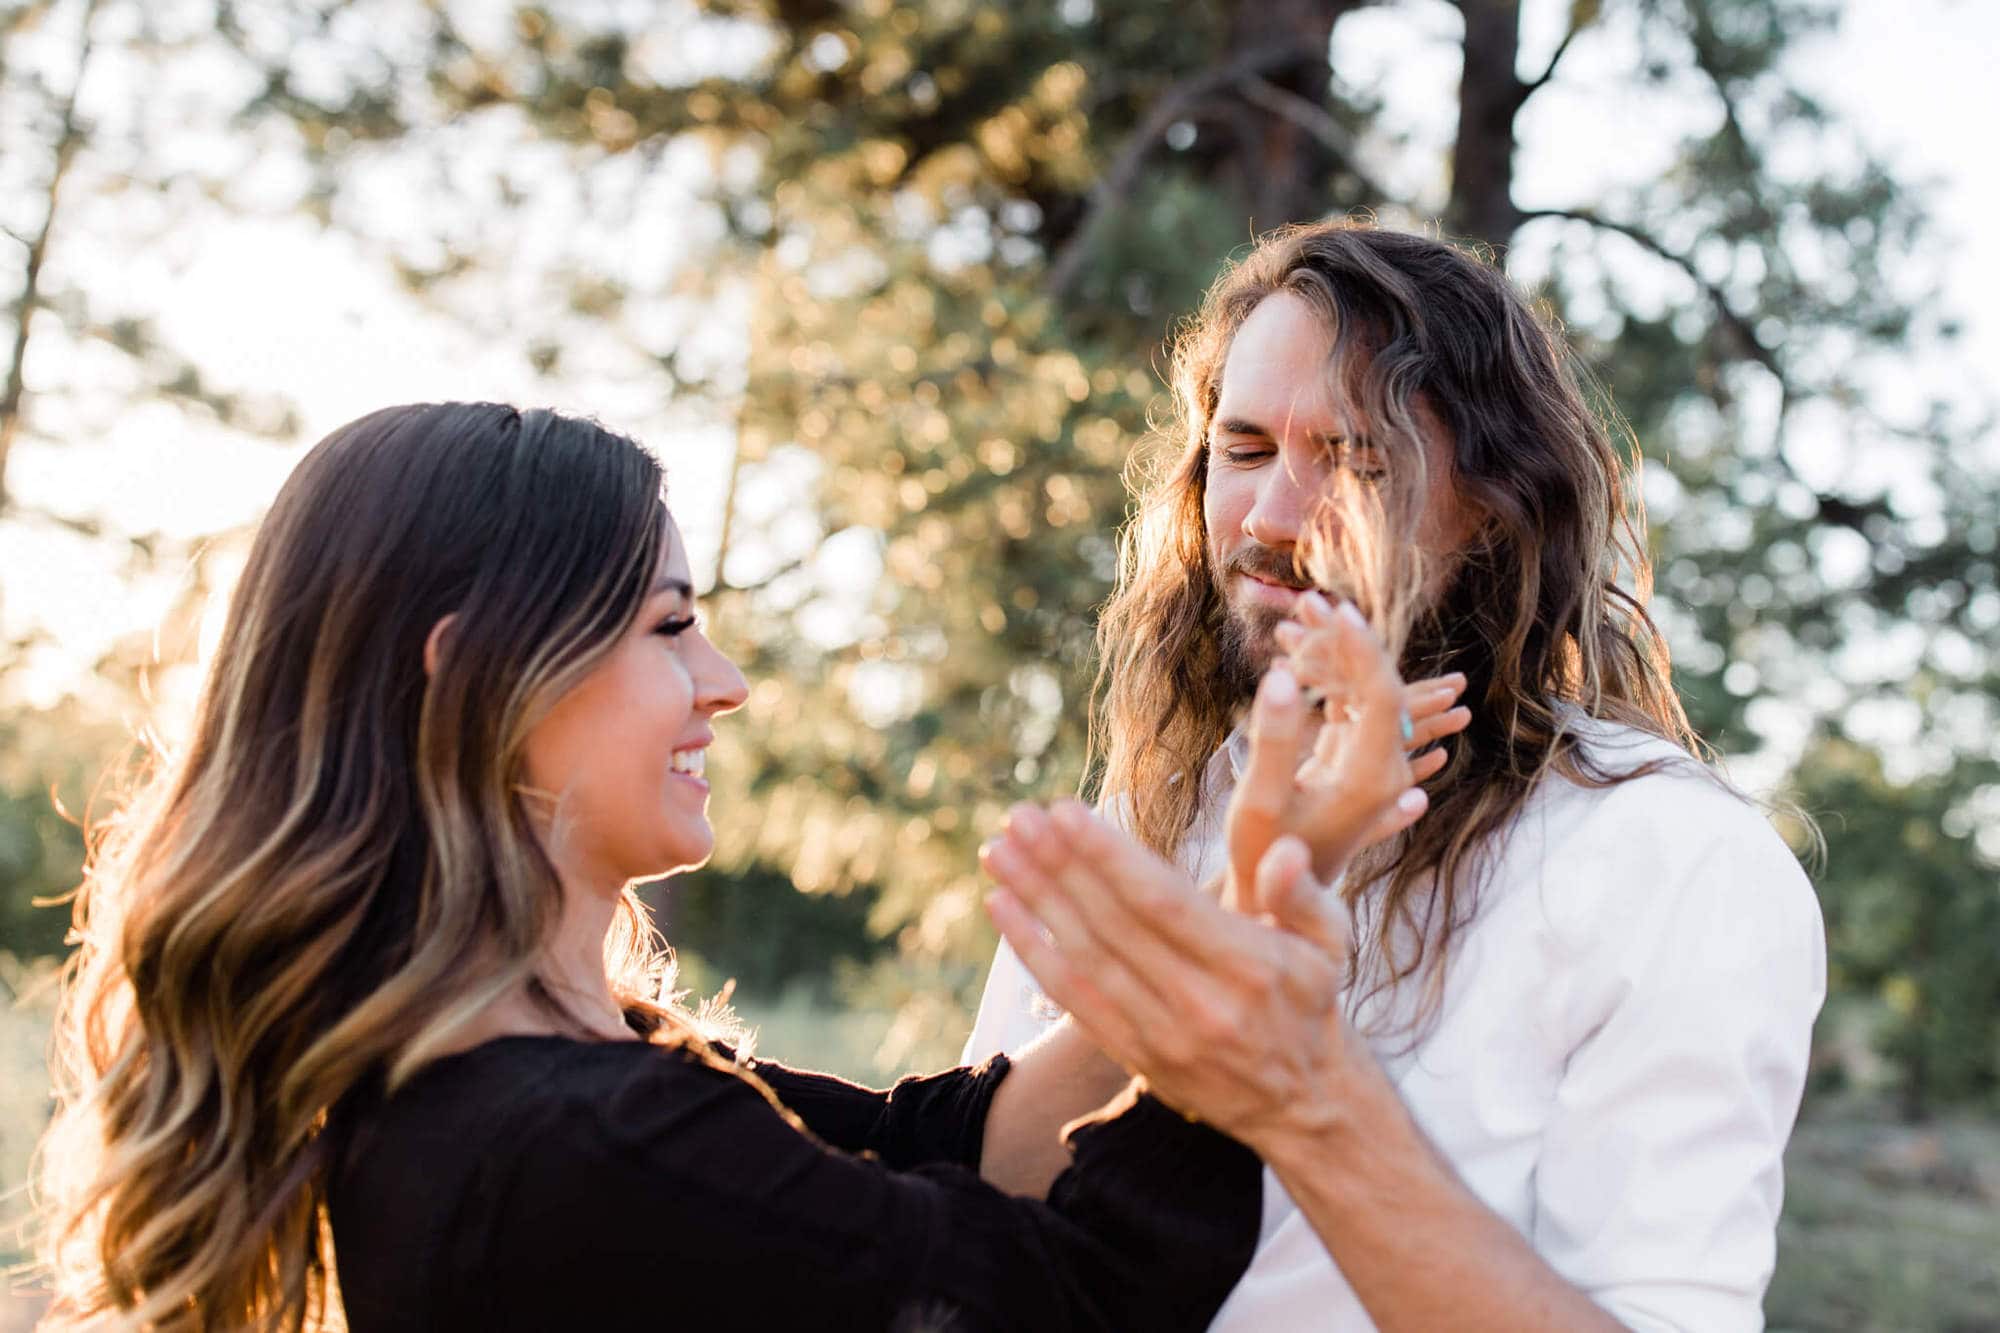 Laughing, Leah picks Dandelion fluff out of David's hair during their forest engagement photo session.